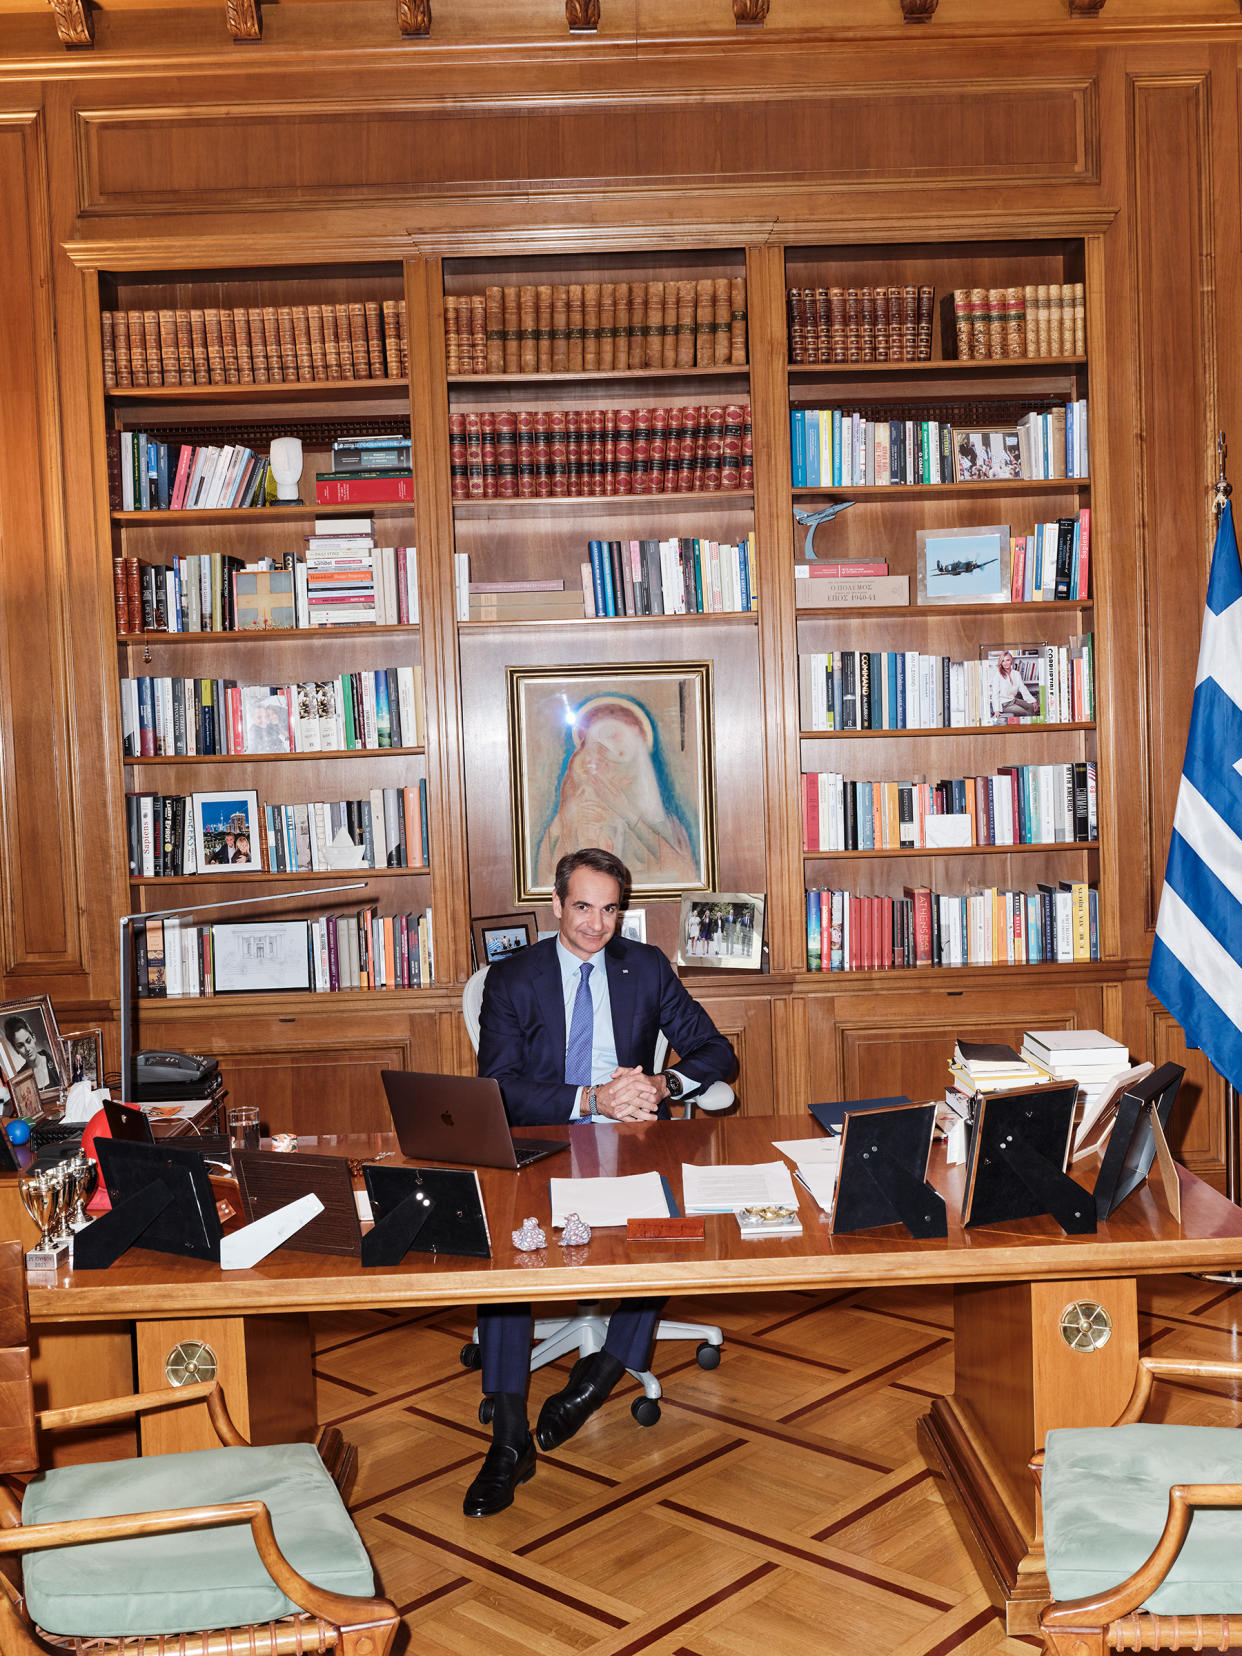 The Greek Prime Minister in his office at Maximos Mansion in Athens on March 12.<span class="copyright">Yiorgos Kaplanidis for TIME</span>